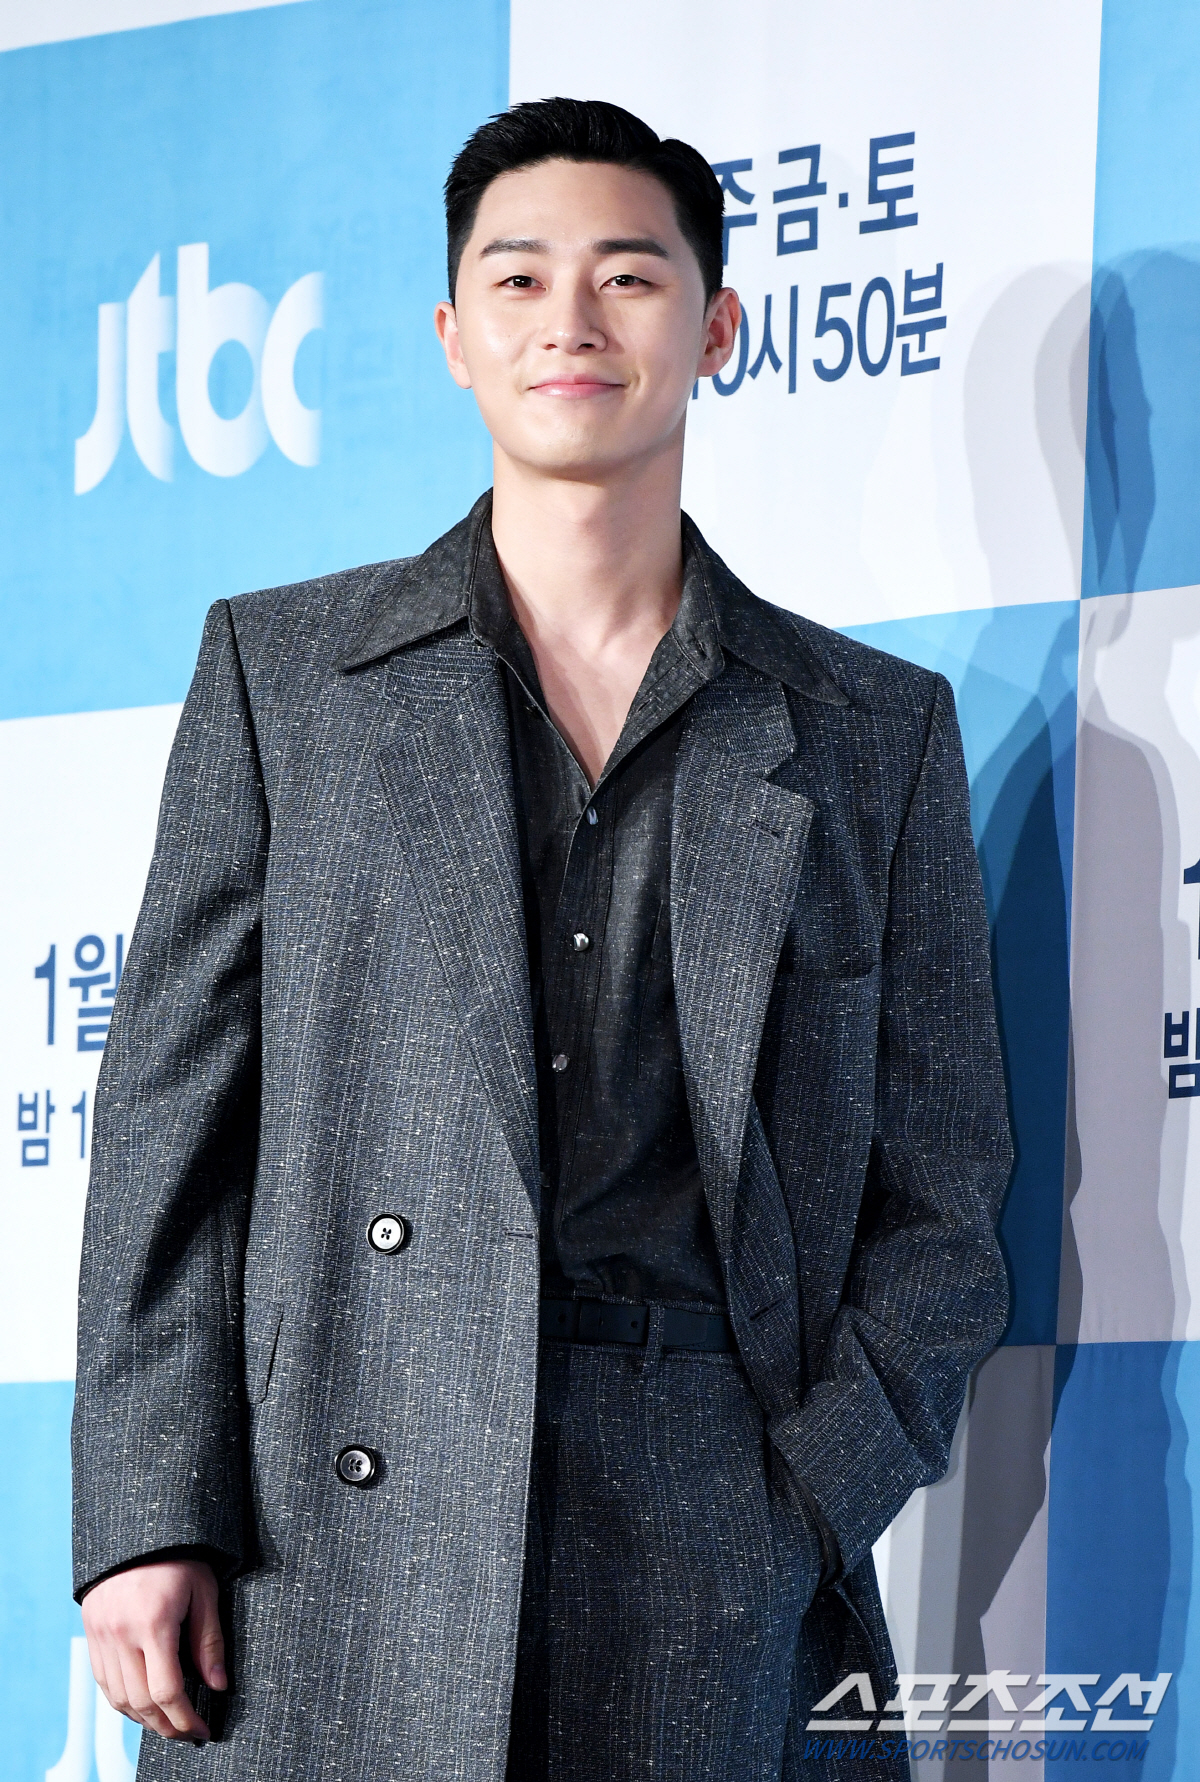 Actor Park Seo-joon revealed his feelings for appearing in Itaewon Class.On the afternoon of the 30th, JTBCs new gilt drama Itaewon Clath (directed by Jo Kwang-jin, directed by Kim Seong-yoon) was presented at the Conrad Hotel in Yeouido, Yeongdeungpo-gu, Seoul.The event was attended by Park Seo-joon, Kim Dae-mi, Yoo Jae-myeong, Kwon Na-ra, Kim Seong-yoon PD, and Jo Kwang-jin.Park Seo-joon said, Drama did not get away from the original because it is so famous.Drama is likely to be broadcast with a lot of more interesting stories added.As you have seen many times in the early days of Drama, I have tried to express such parts delicately because I thought that the original Web tone was very important, and the reason why I was attracted to this drama was so interesting that I felt the charm of expressing the narrative in the role. I think you can enjoy it even if you enjoy it. Itaewon Clath is a drama that moved Web toon Itaewon Clath, which was evaluated as a story of youths living in an absurd world, to the CRT. Park Seo-joon, who was constantly mentioned in the virtual casting stage, joined the characters and raised the expectation of viewers.In particular, Kim Seong-yoon PD, who was recognized for his sensual production through Gurmigreen Moonlight and Discovery of Love, grabbed a megaphone and wrote directly by Jo Kwang-jin, author of Web toon.Here, expectations are gathered as the first drama that the production company Showbox, which showed many movies with both workability and popularity such as Taxi Driver, Assassination and Tunnel, will show.It will be broadcast first at 10:50 p.m. on the 31st.